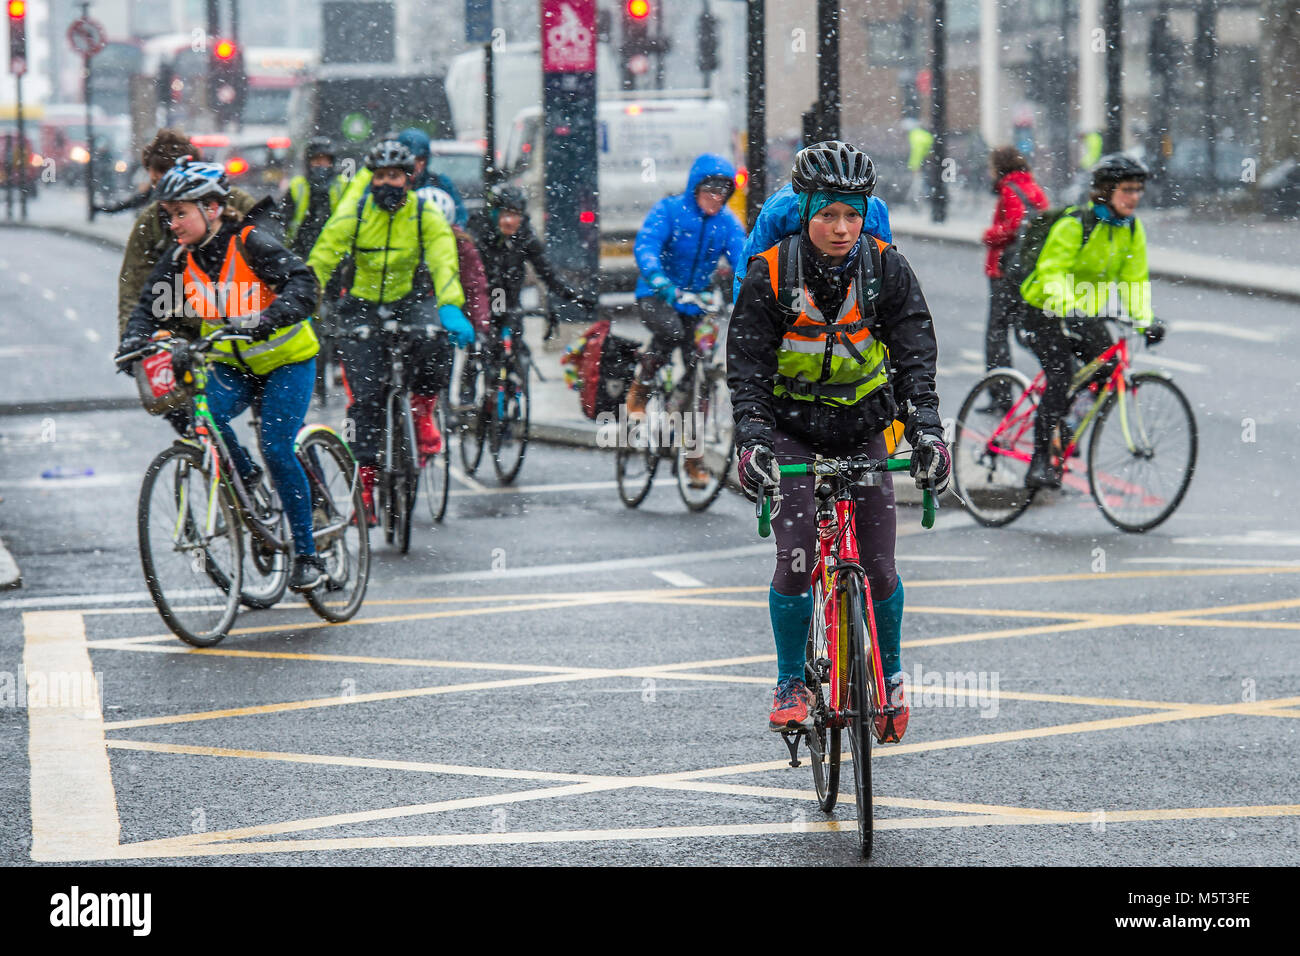 London, UK. 26th February, 2018. Cyclists struggle throught the brief blizzard - Commuters face a miserable journey to work as the snow falls in freezing temperatures in Pimlico. Credit: Guy Bell/Alamy Live News Stock Photo